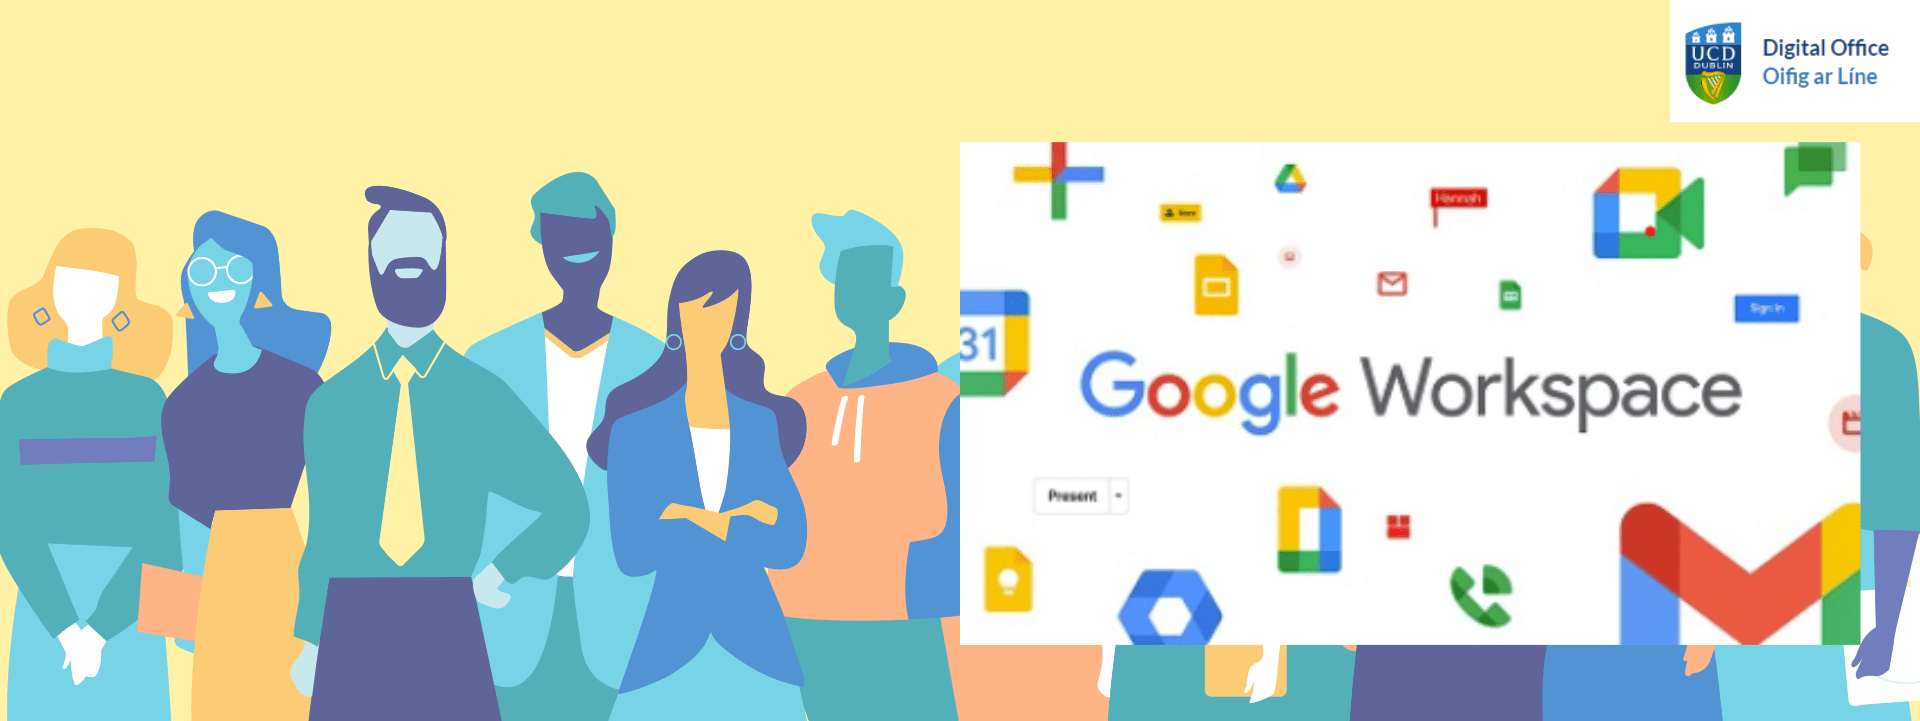 Join our community on Google Spaces for time-saving tips and other advice on using Gmail, Calendar and more. 
It is open to all UCD staff. image